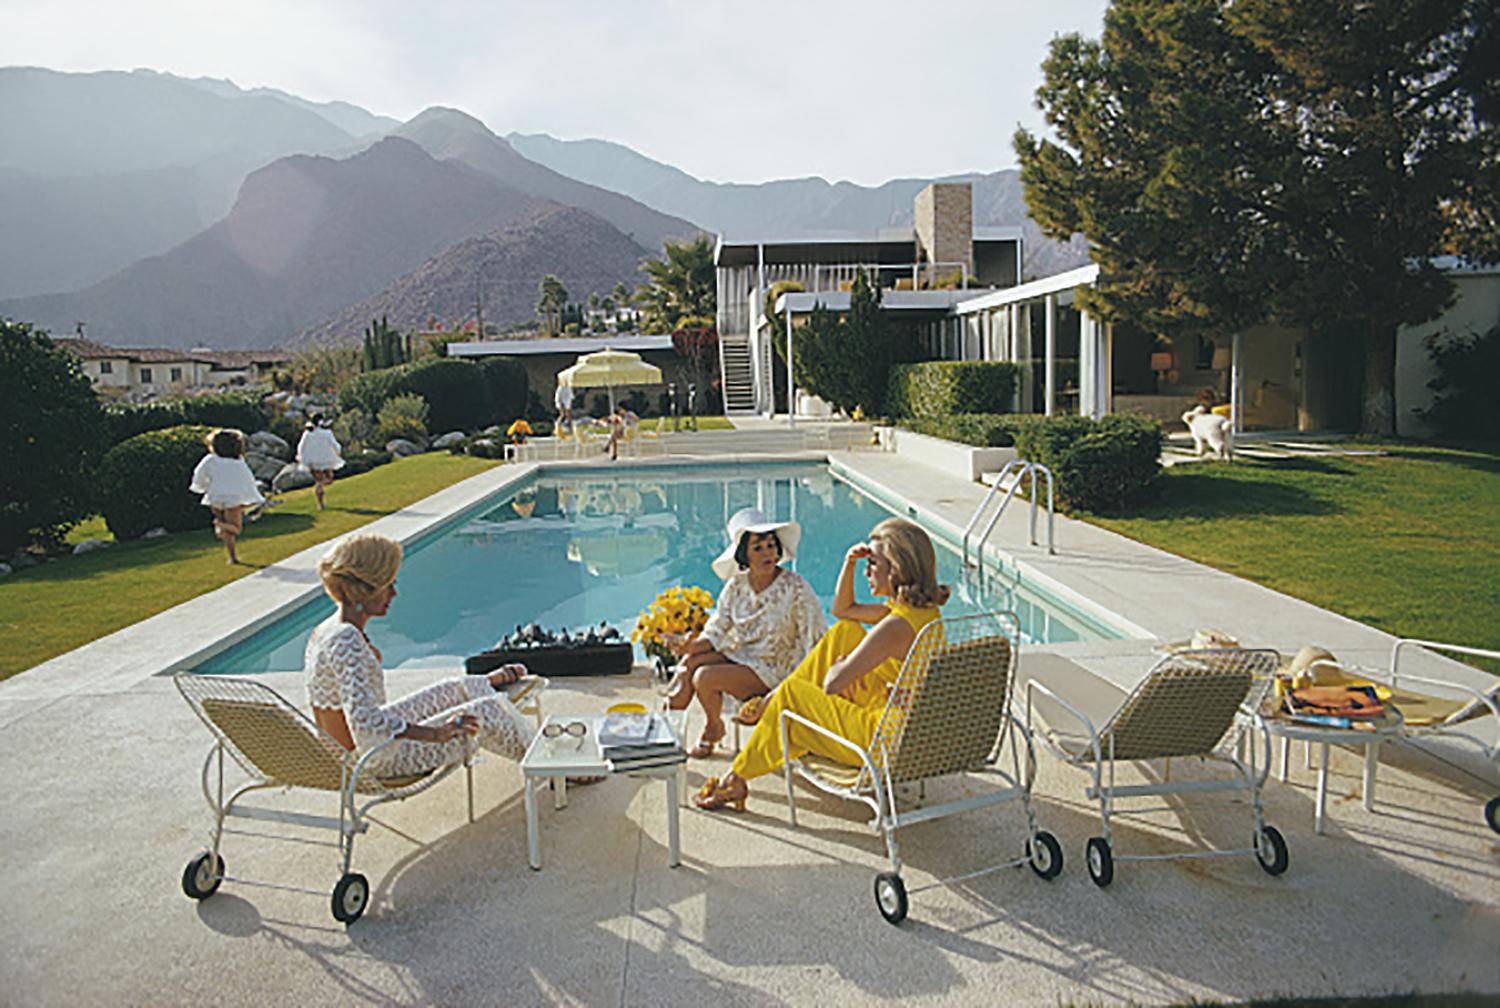 Slim Aarons, 'Poolside Gaze'
Estate stamped and hand numbered 1/150 with certificate of authenticity from the estate. 
Printed later.

Various sizes available. Please reach out if you don't see a specific Slim Aarons print listed. Provocateur